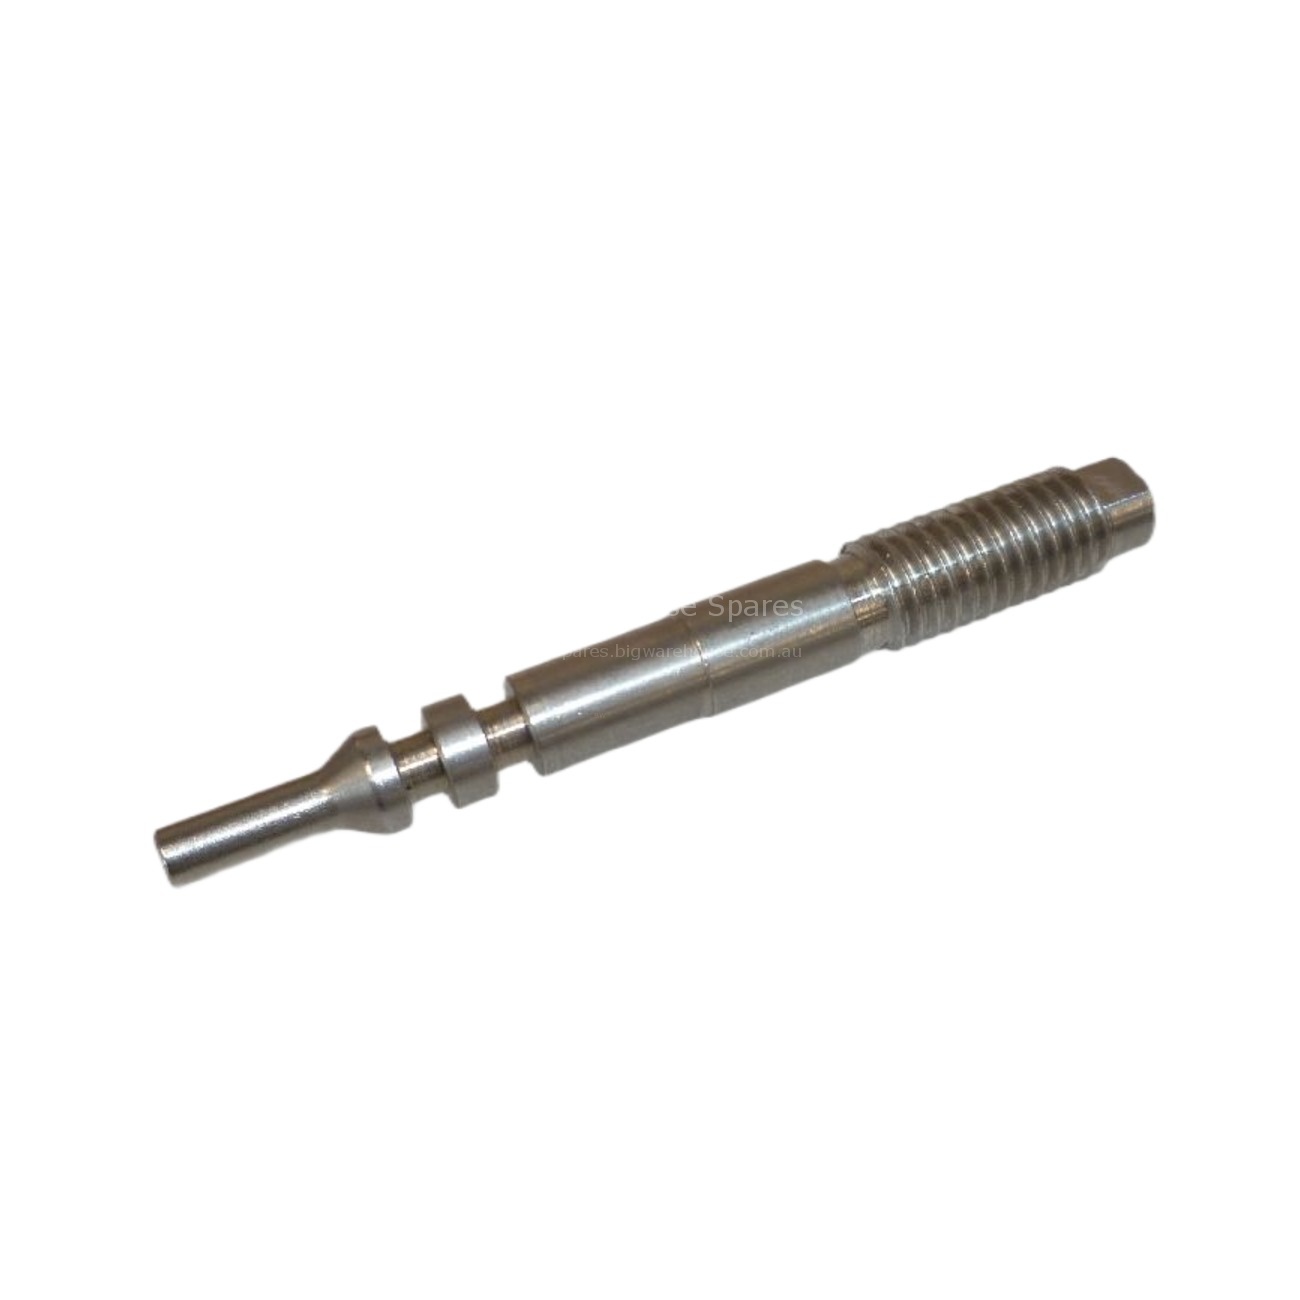 PIN ST./STEEL 65.5 mm FOR STEAM TAP